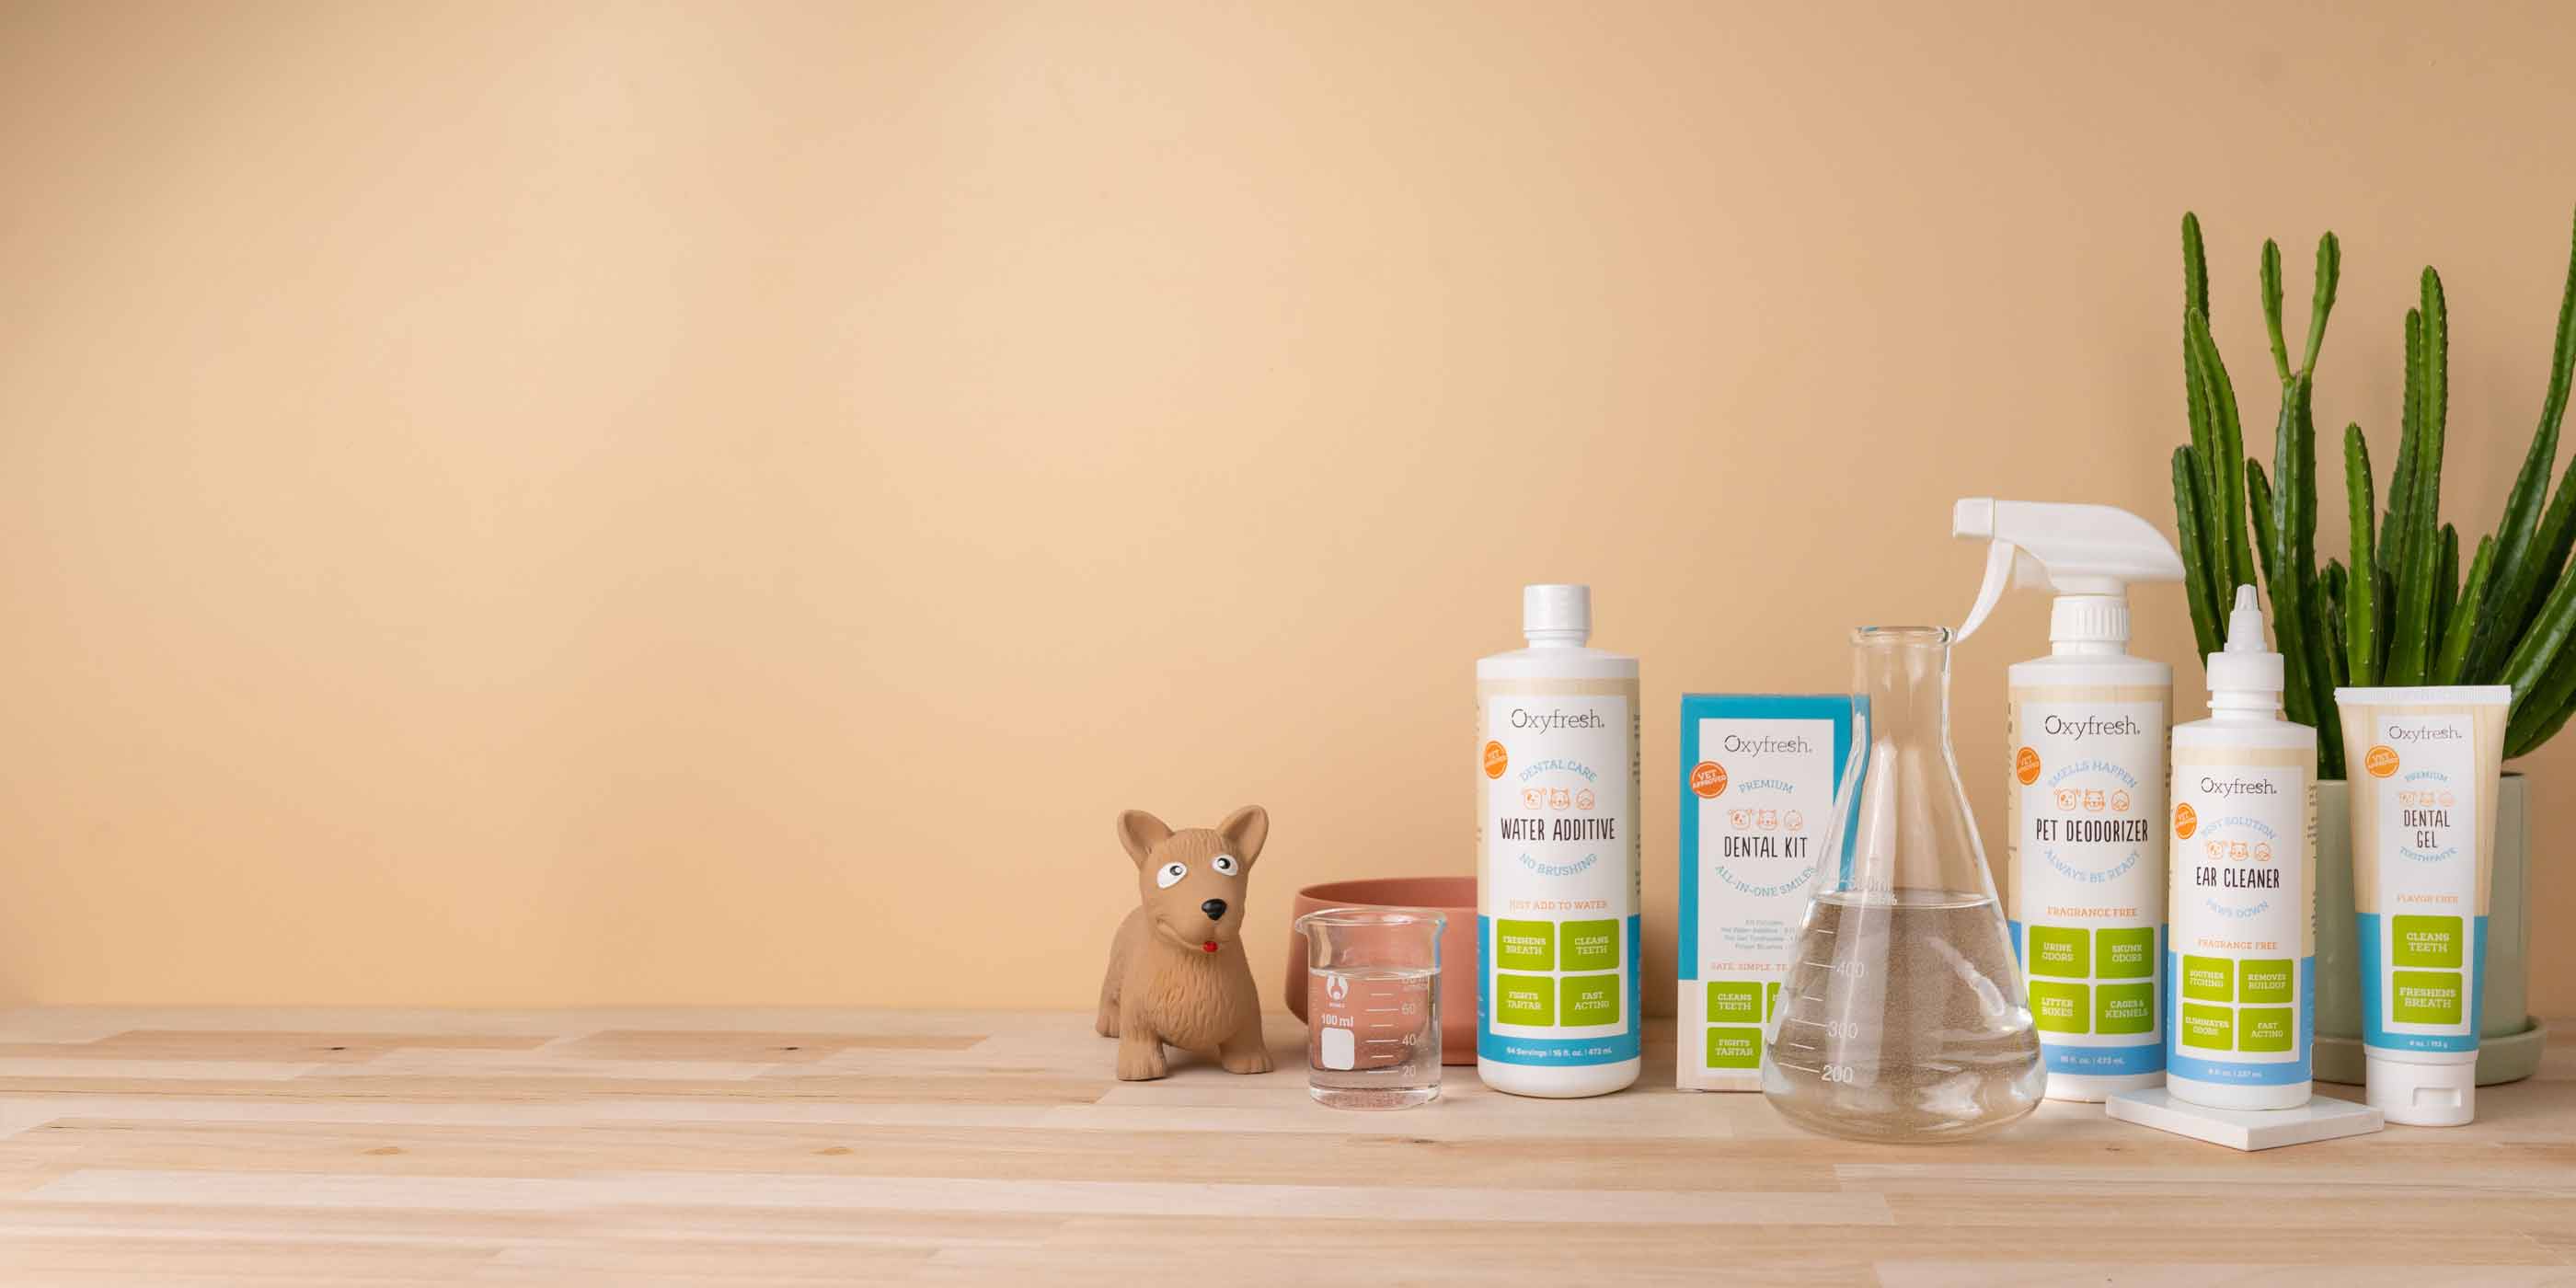 oxyfresh pet product lineup for fresh breath, coats, ears, and spaces